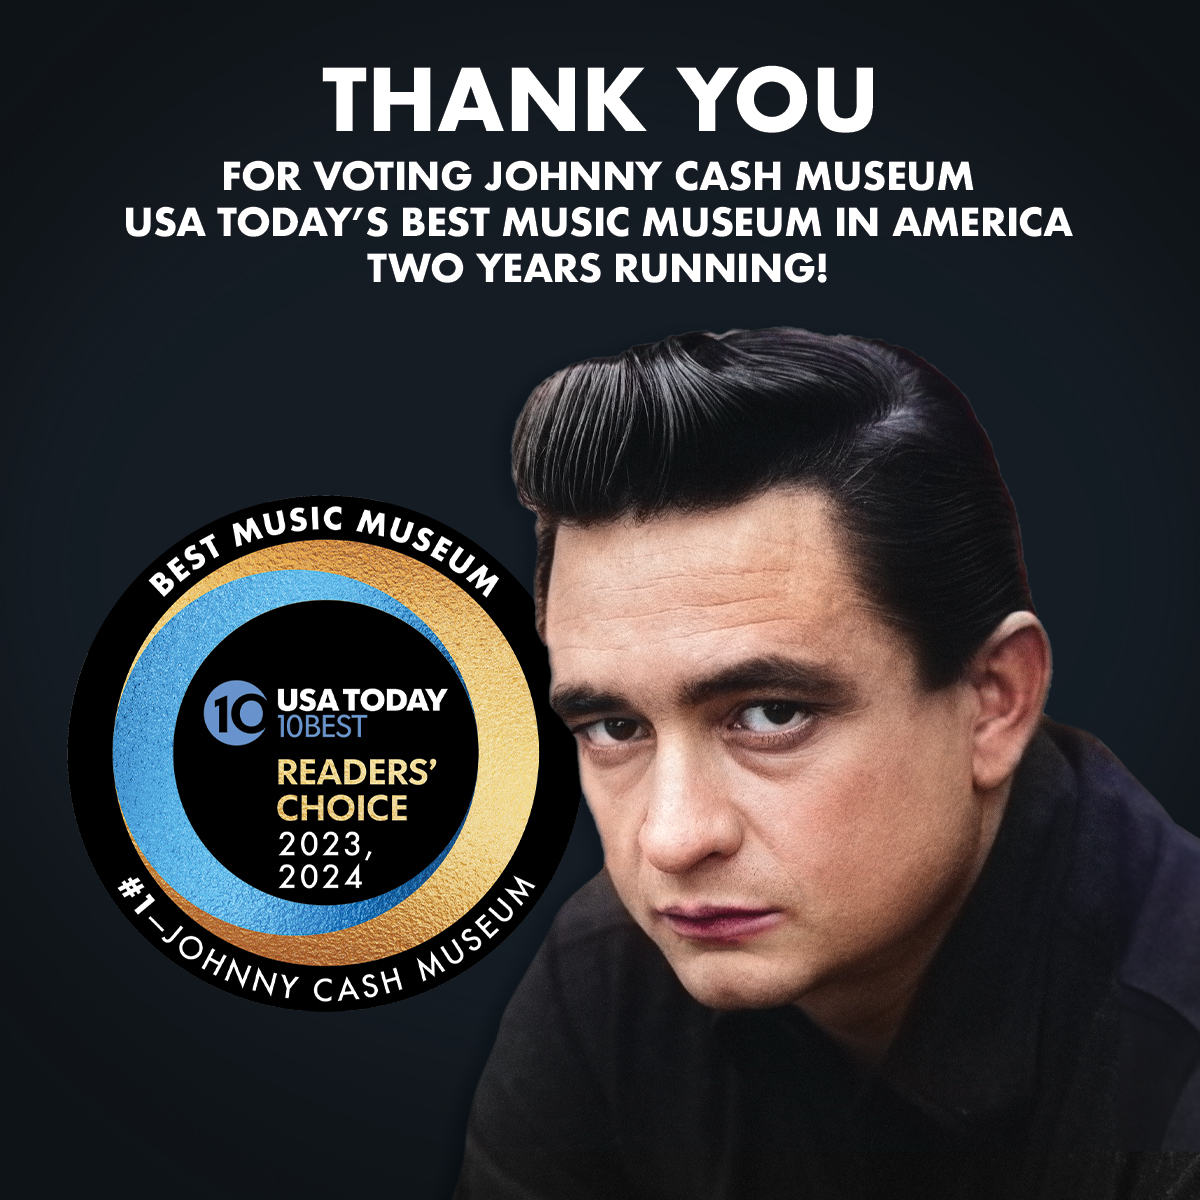 The @CashMuseum has been named the Best Music Museum for the 2024 USAToday's 10Best Music Museums in America! This is the museum’s second consecutive year with the title, establishing it as the only museum to achieve the recognition twice in a row 🏆🖤